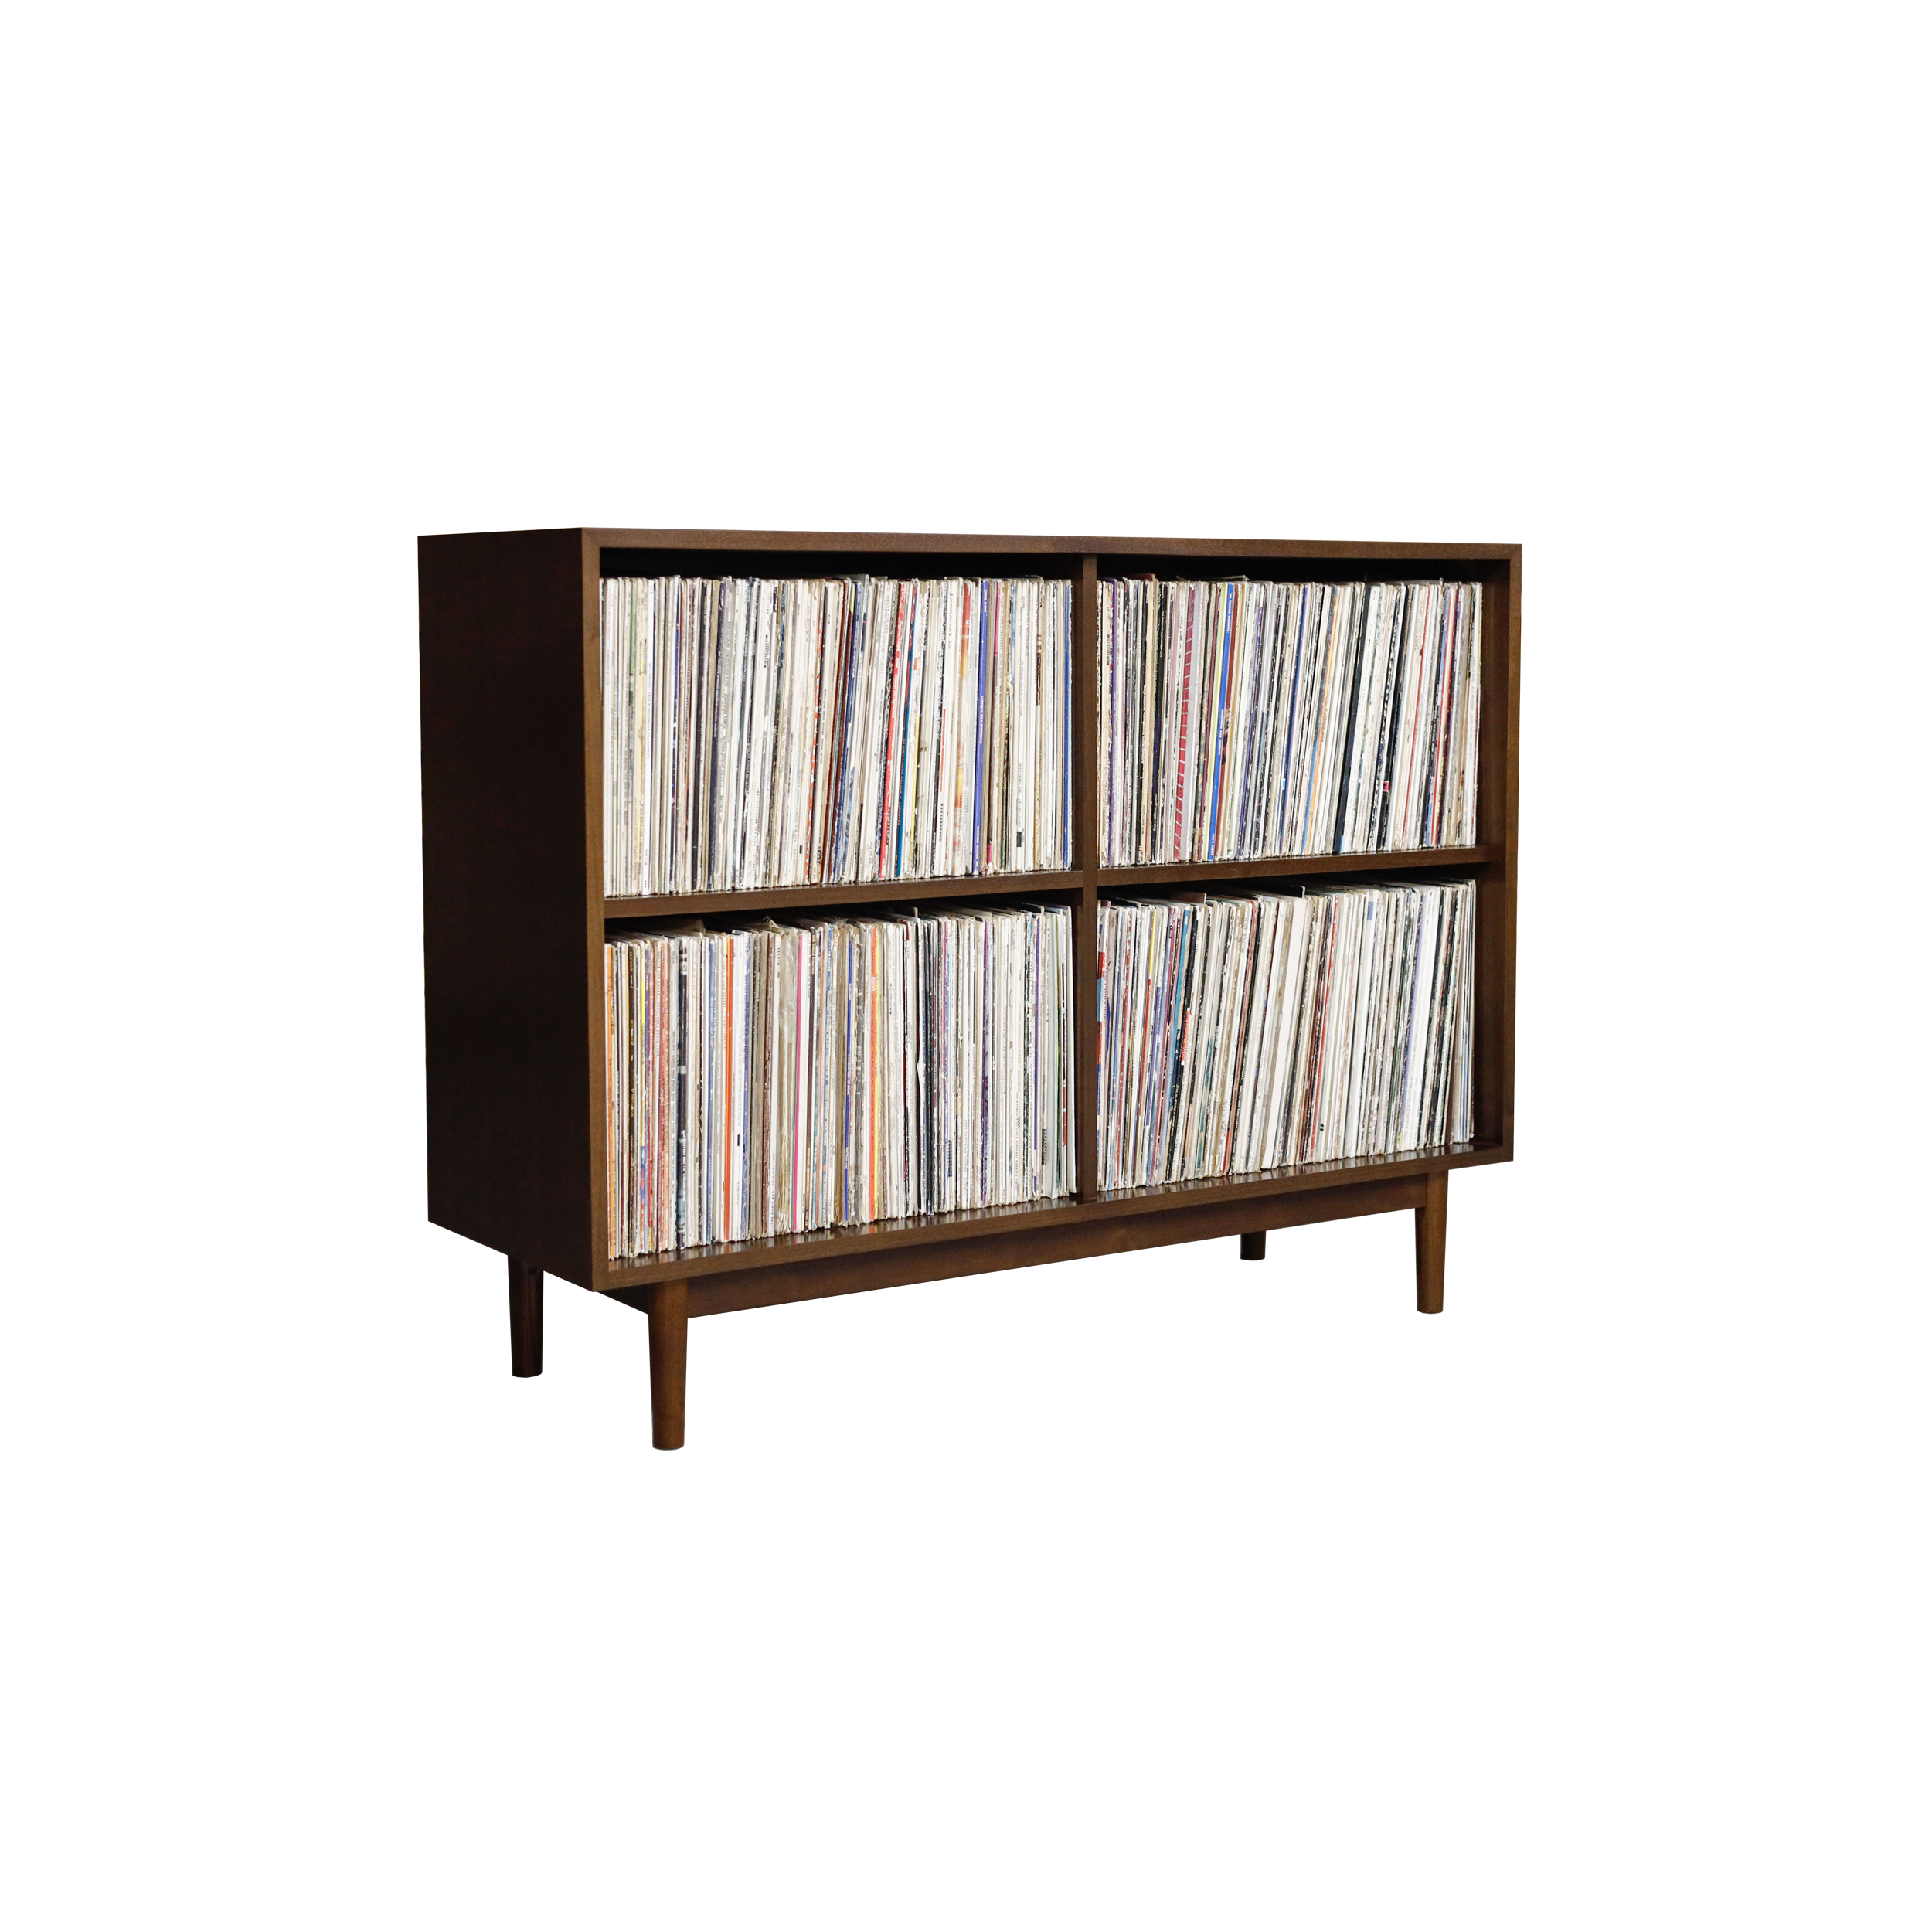 48.25" 2 x 2 Record Storage Cabinet - Ready to Ship